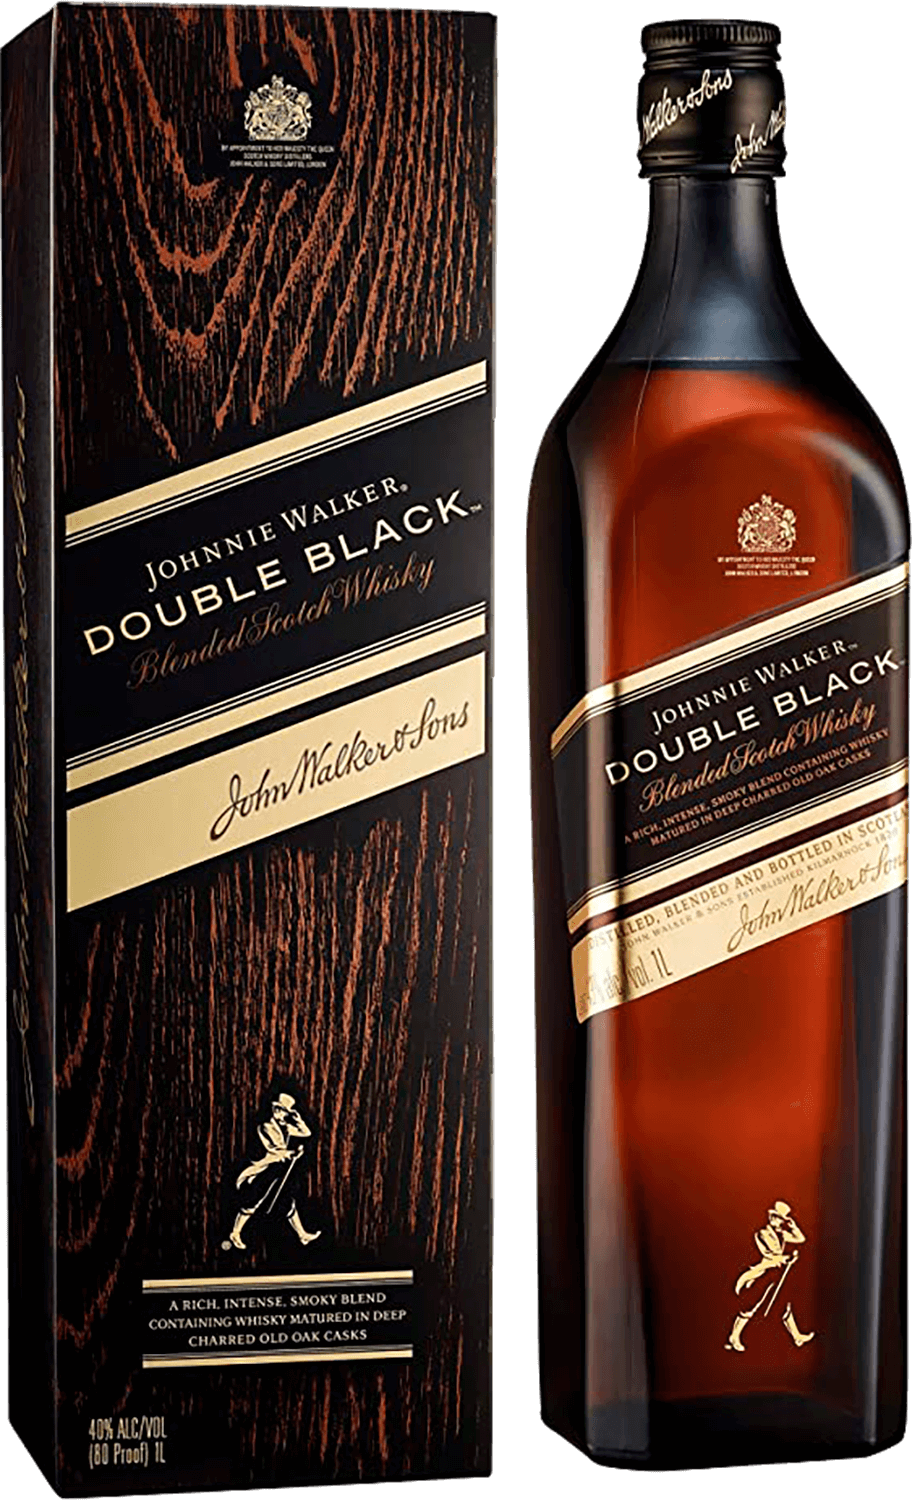 Johnnie Walker Double Black Blended Scotch Whisky (gift box)